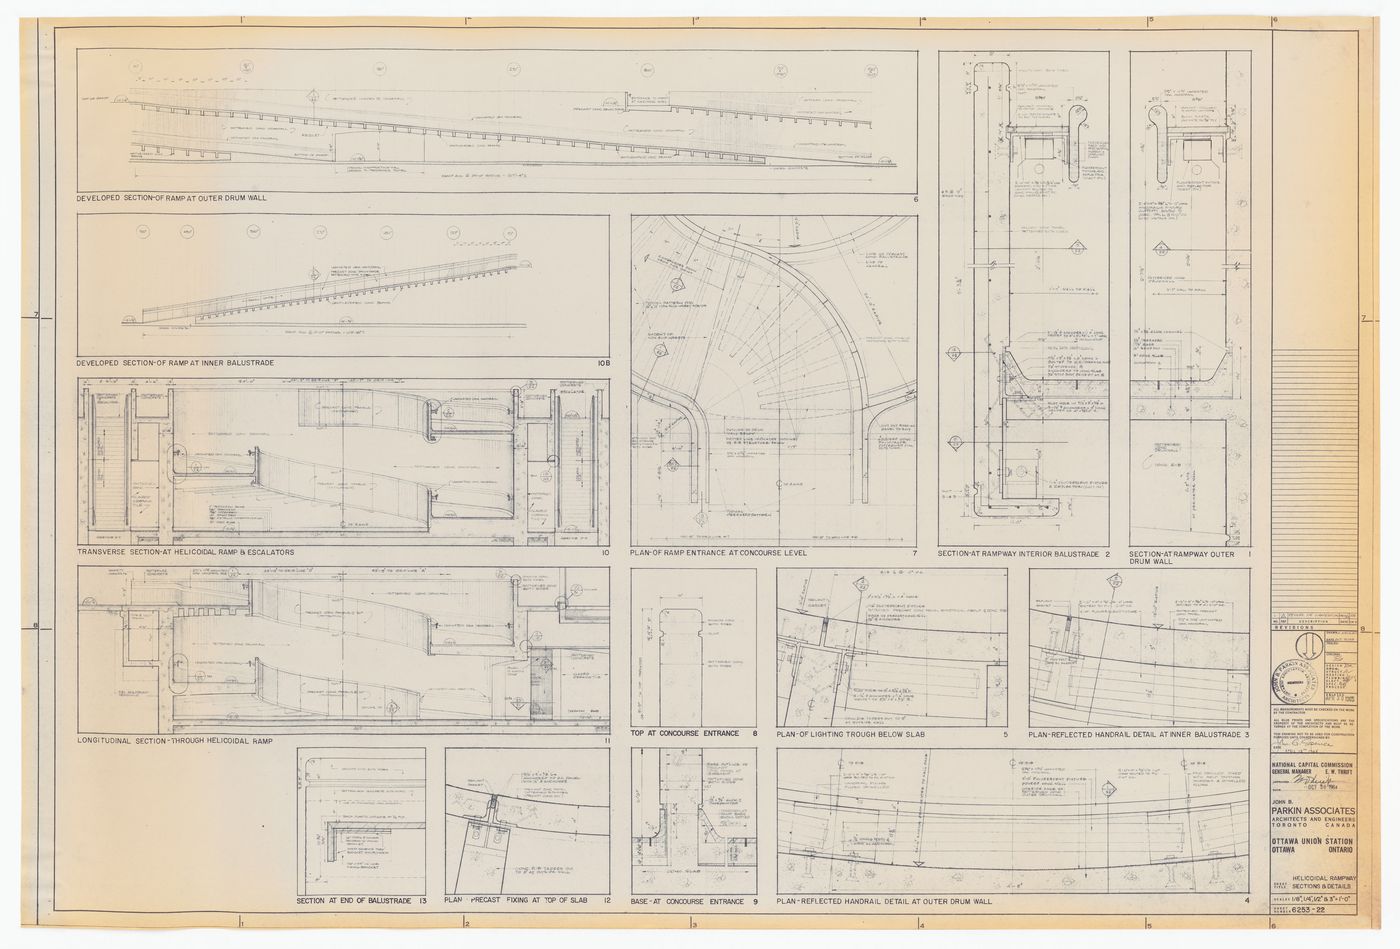 Helicoidal rampway sections and details for Ottawa Union Station, Ottawa, Ontario